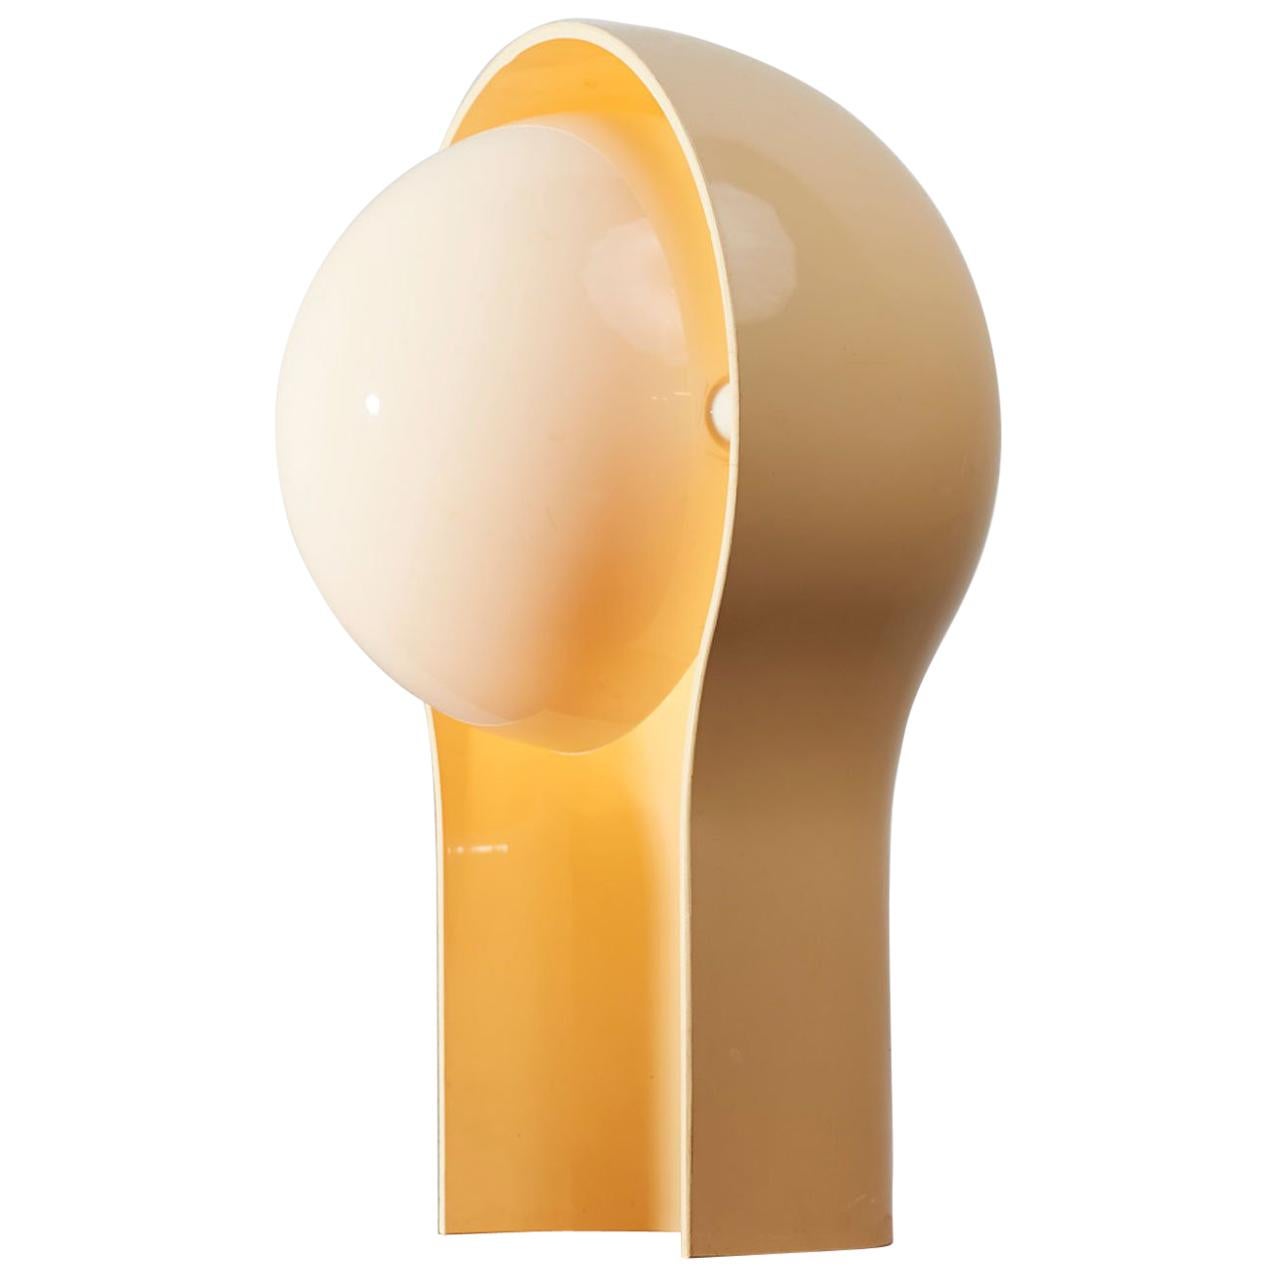 This Telegono table lamp is dripping with midcentury Italian modern design. Made in 1968 by world acclaimed designer Vico Magistretti for Artemide of Italy, circa 1960s.

The white hemispherical inner shade can be swivelled inside the outer ivory